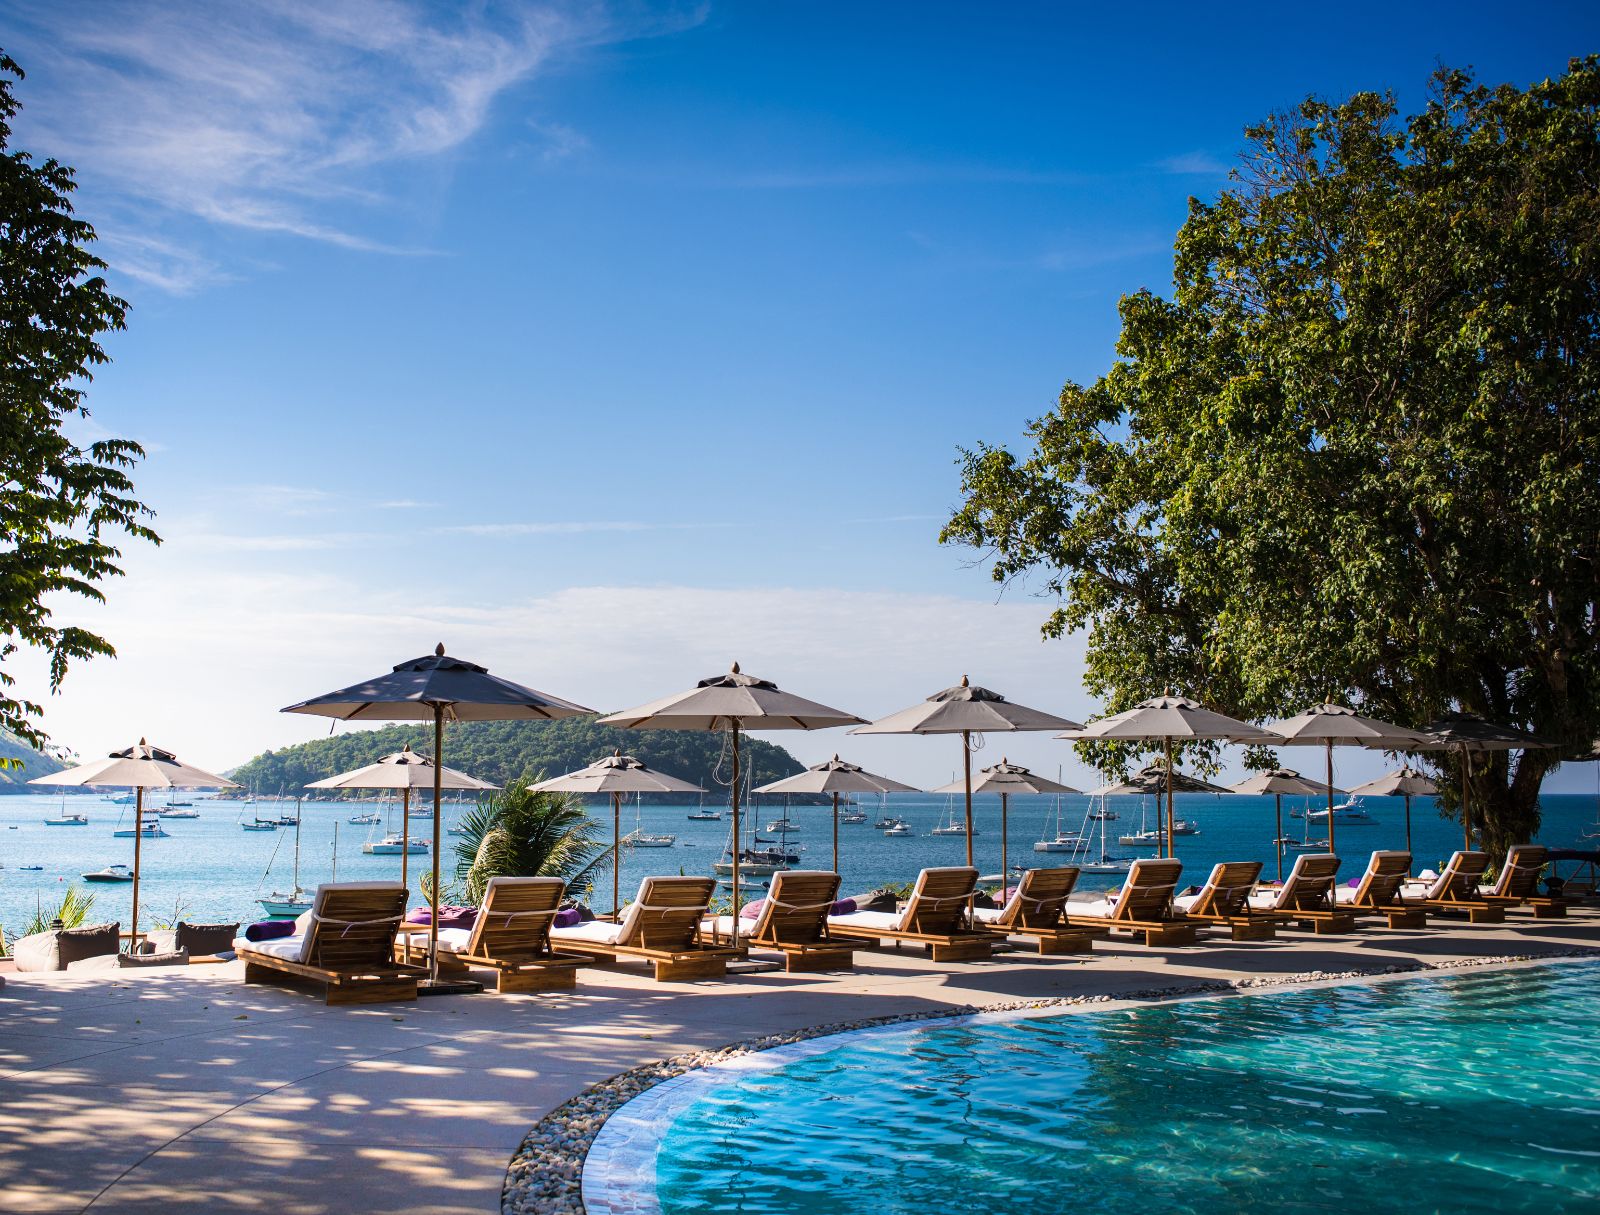 Poolside and ocean view at The Nai Harn resort in the Phuket region of Thailand